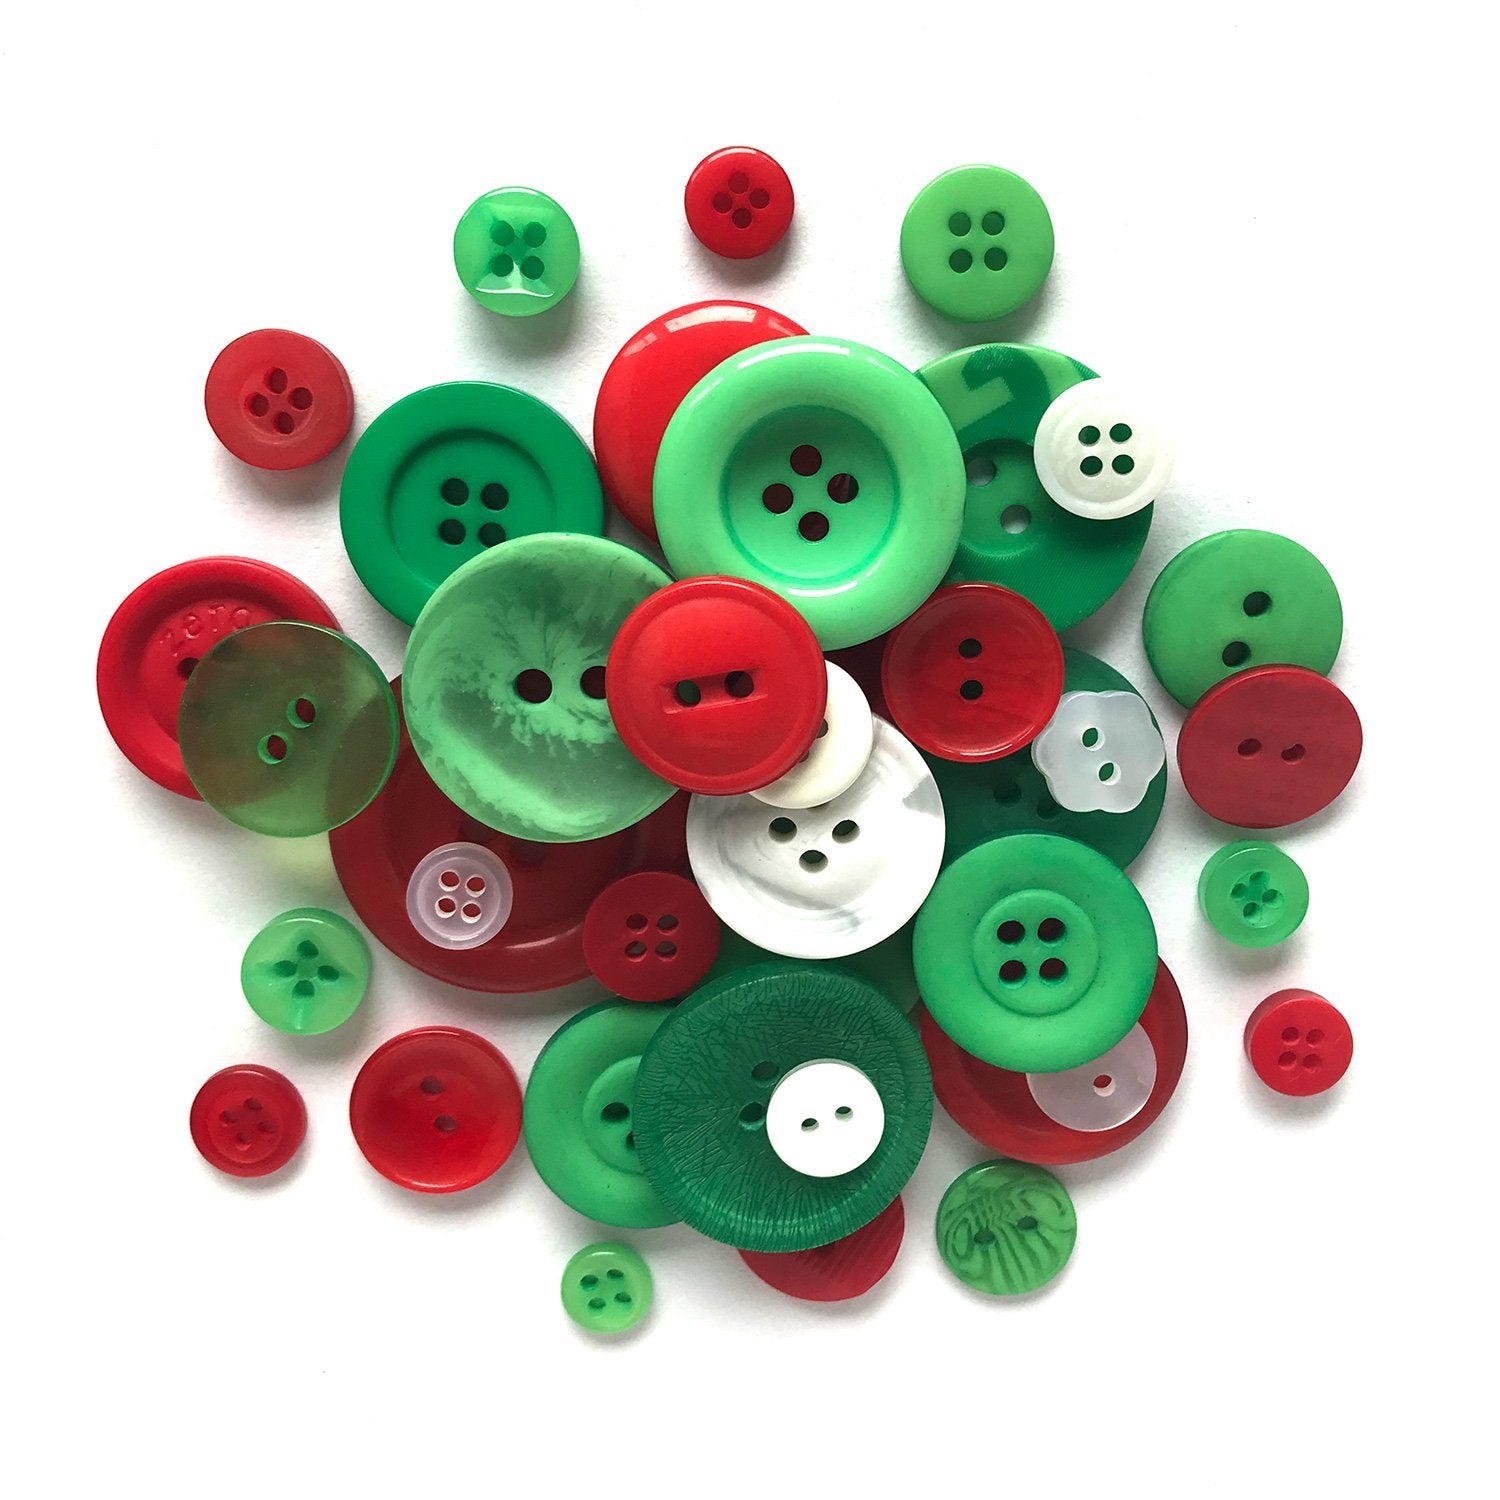 Buttons Galore and More Tiny Collection of Round Sewing & Craft Buttons -  Huge Selection of Colorful Small Buttons (Primary)